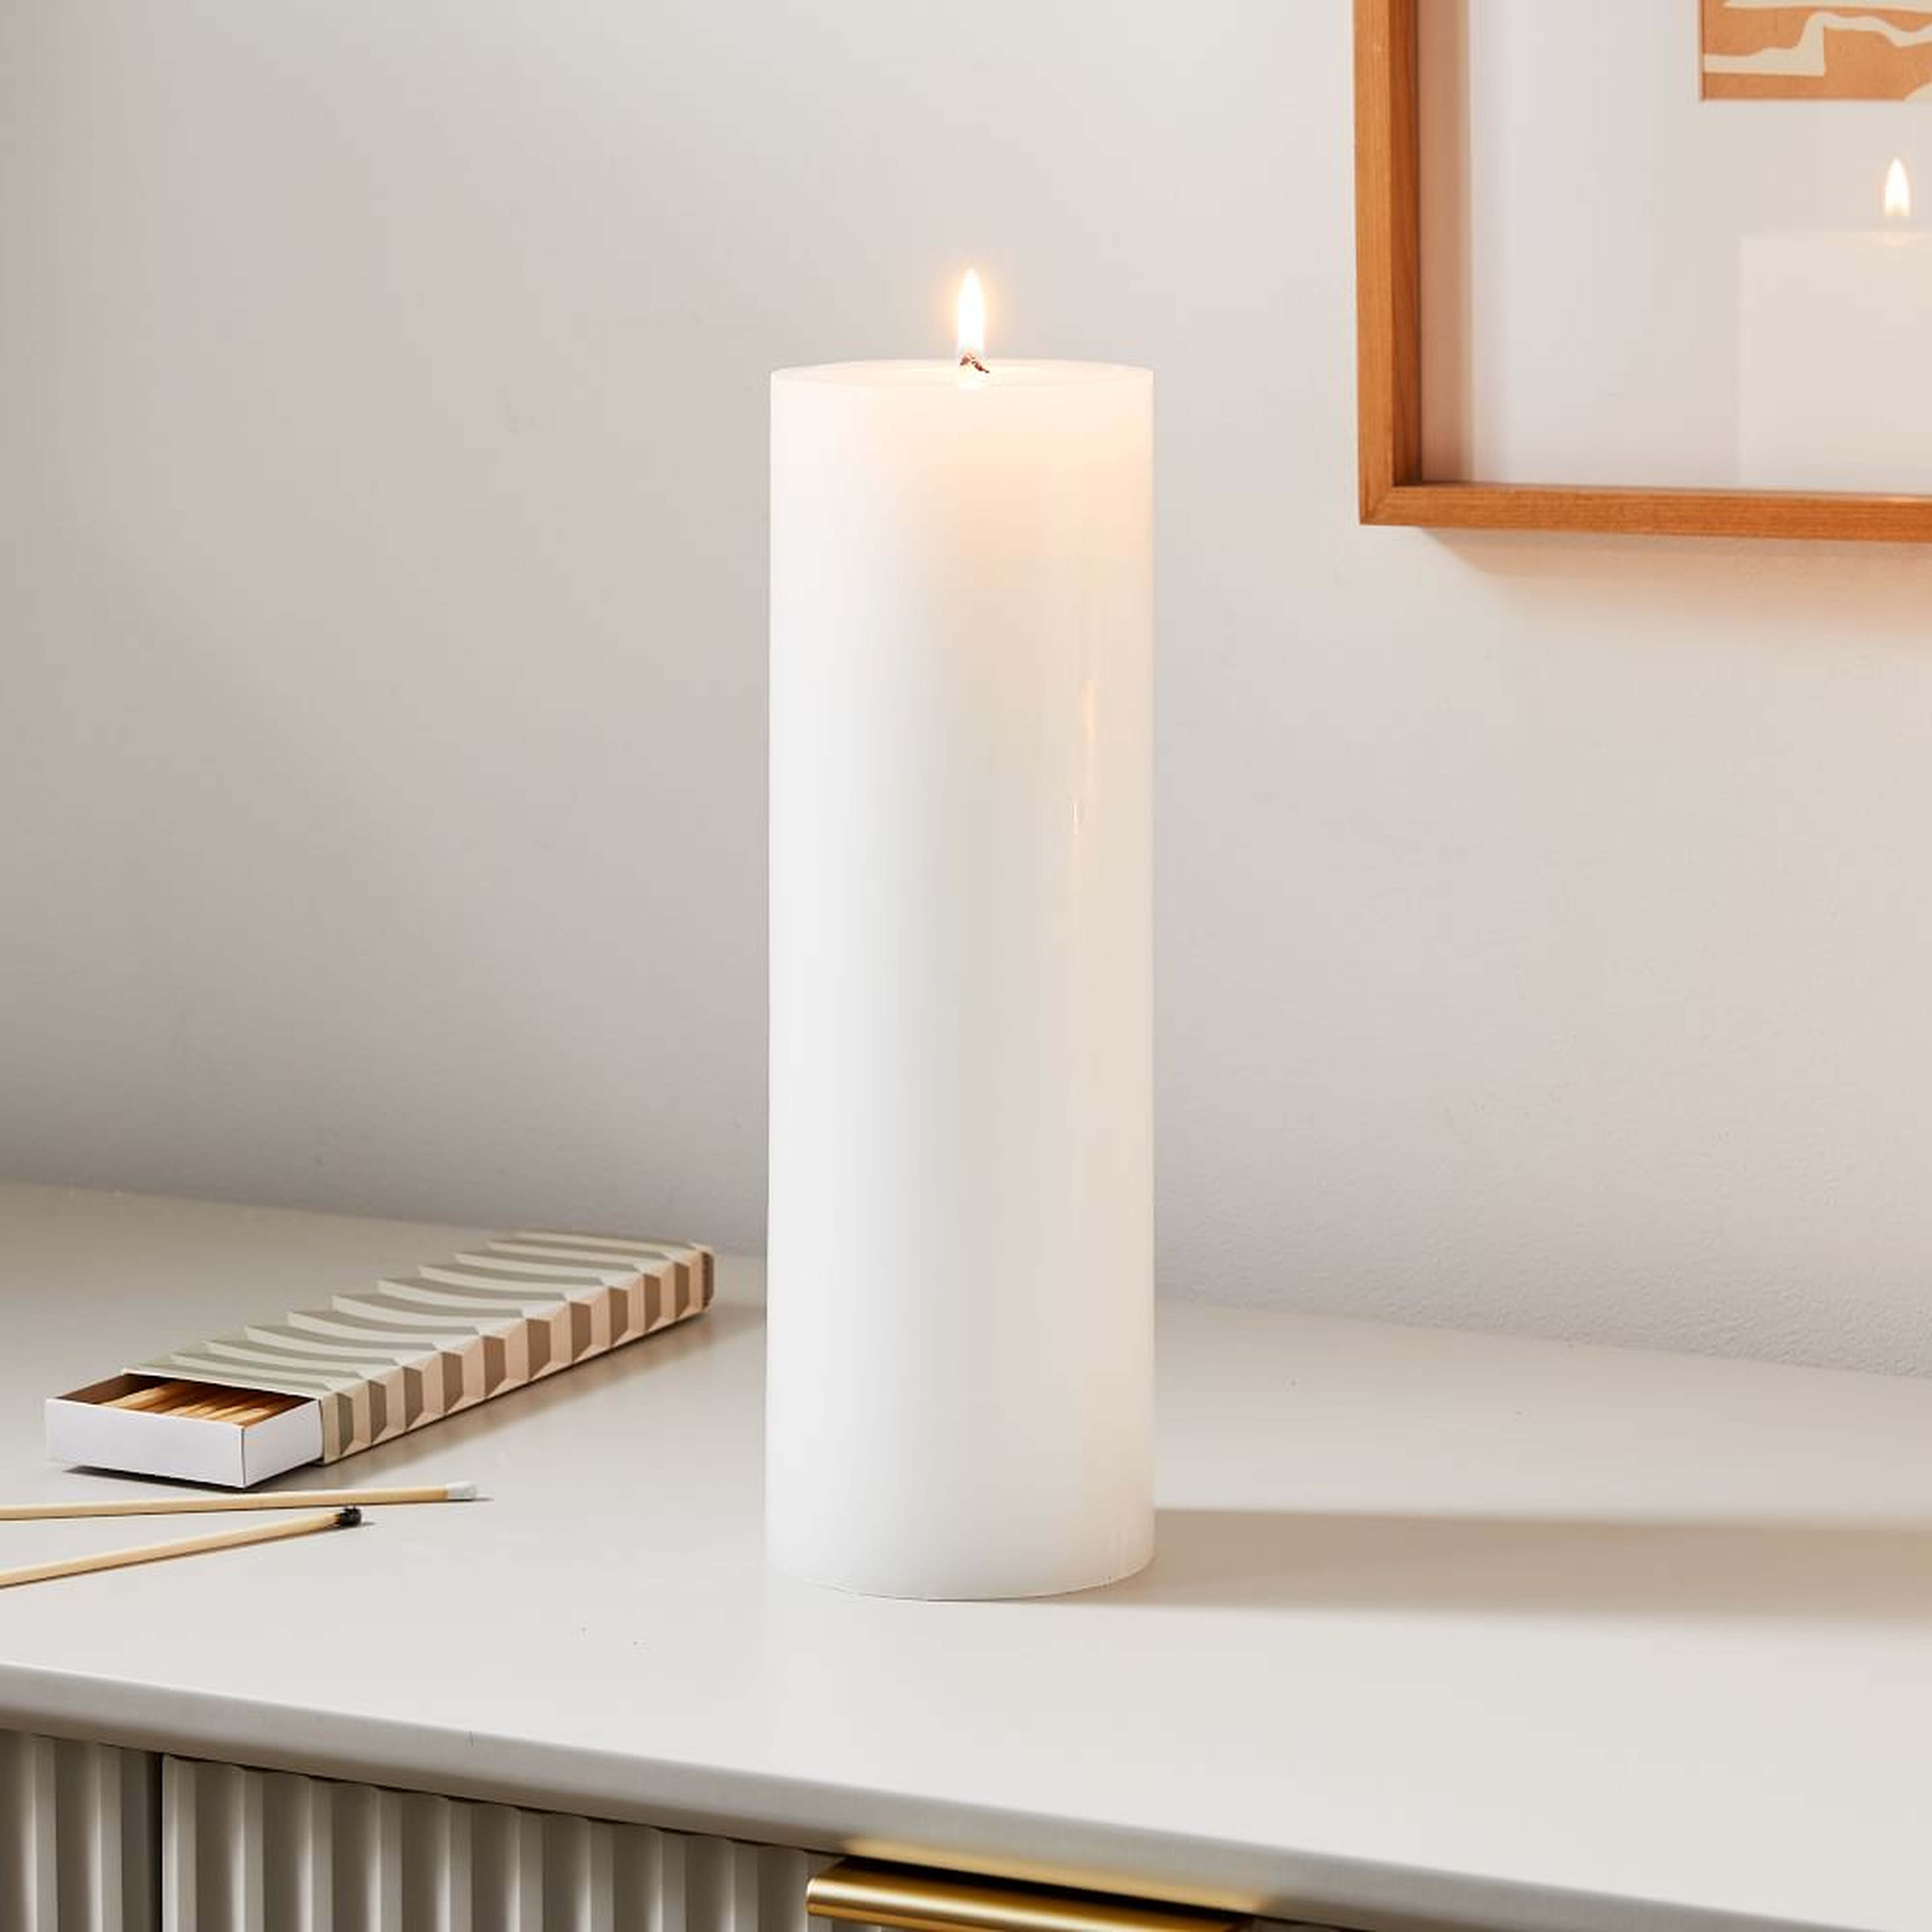 Unscented Pillar Candle, 4"x12", White - West Elm